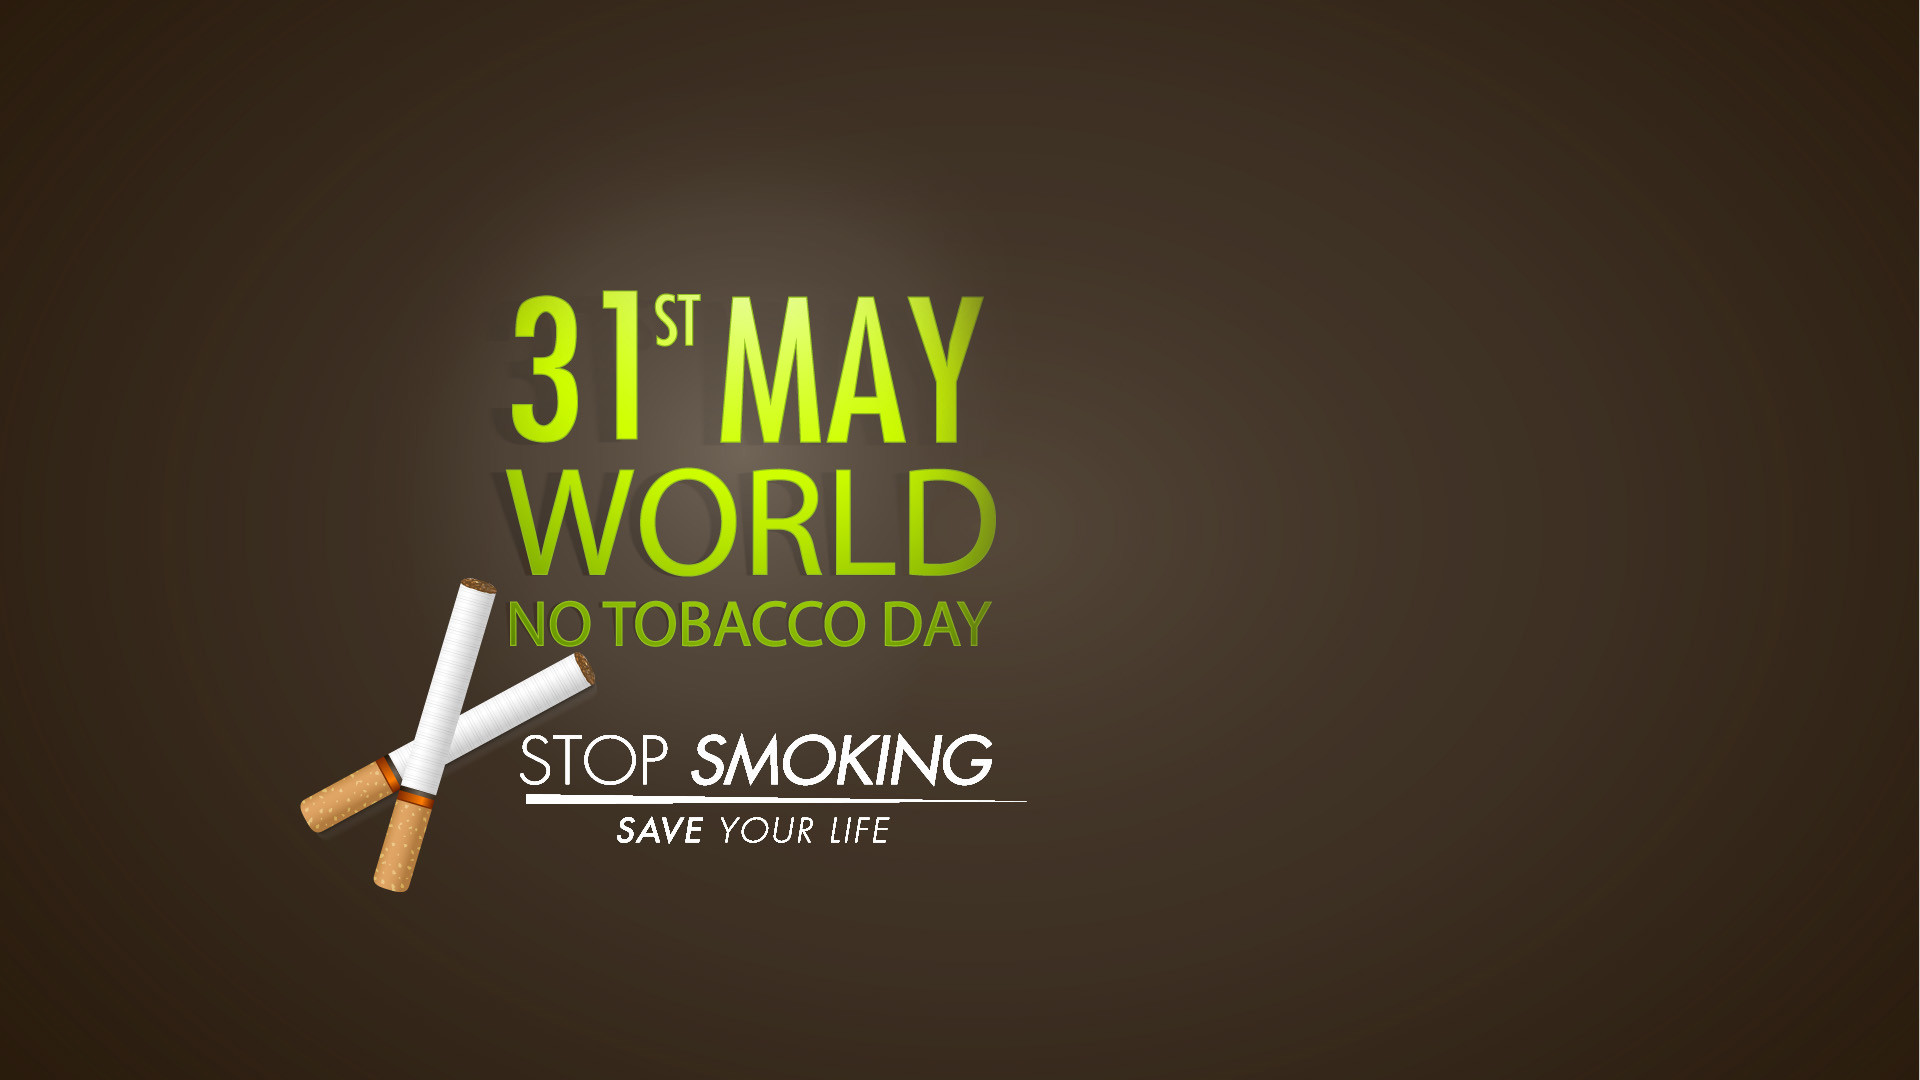 1920x1080 31st May World No Tobacco Day Stop Smoking Save Your Life